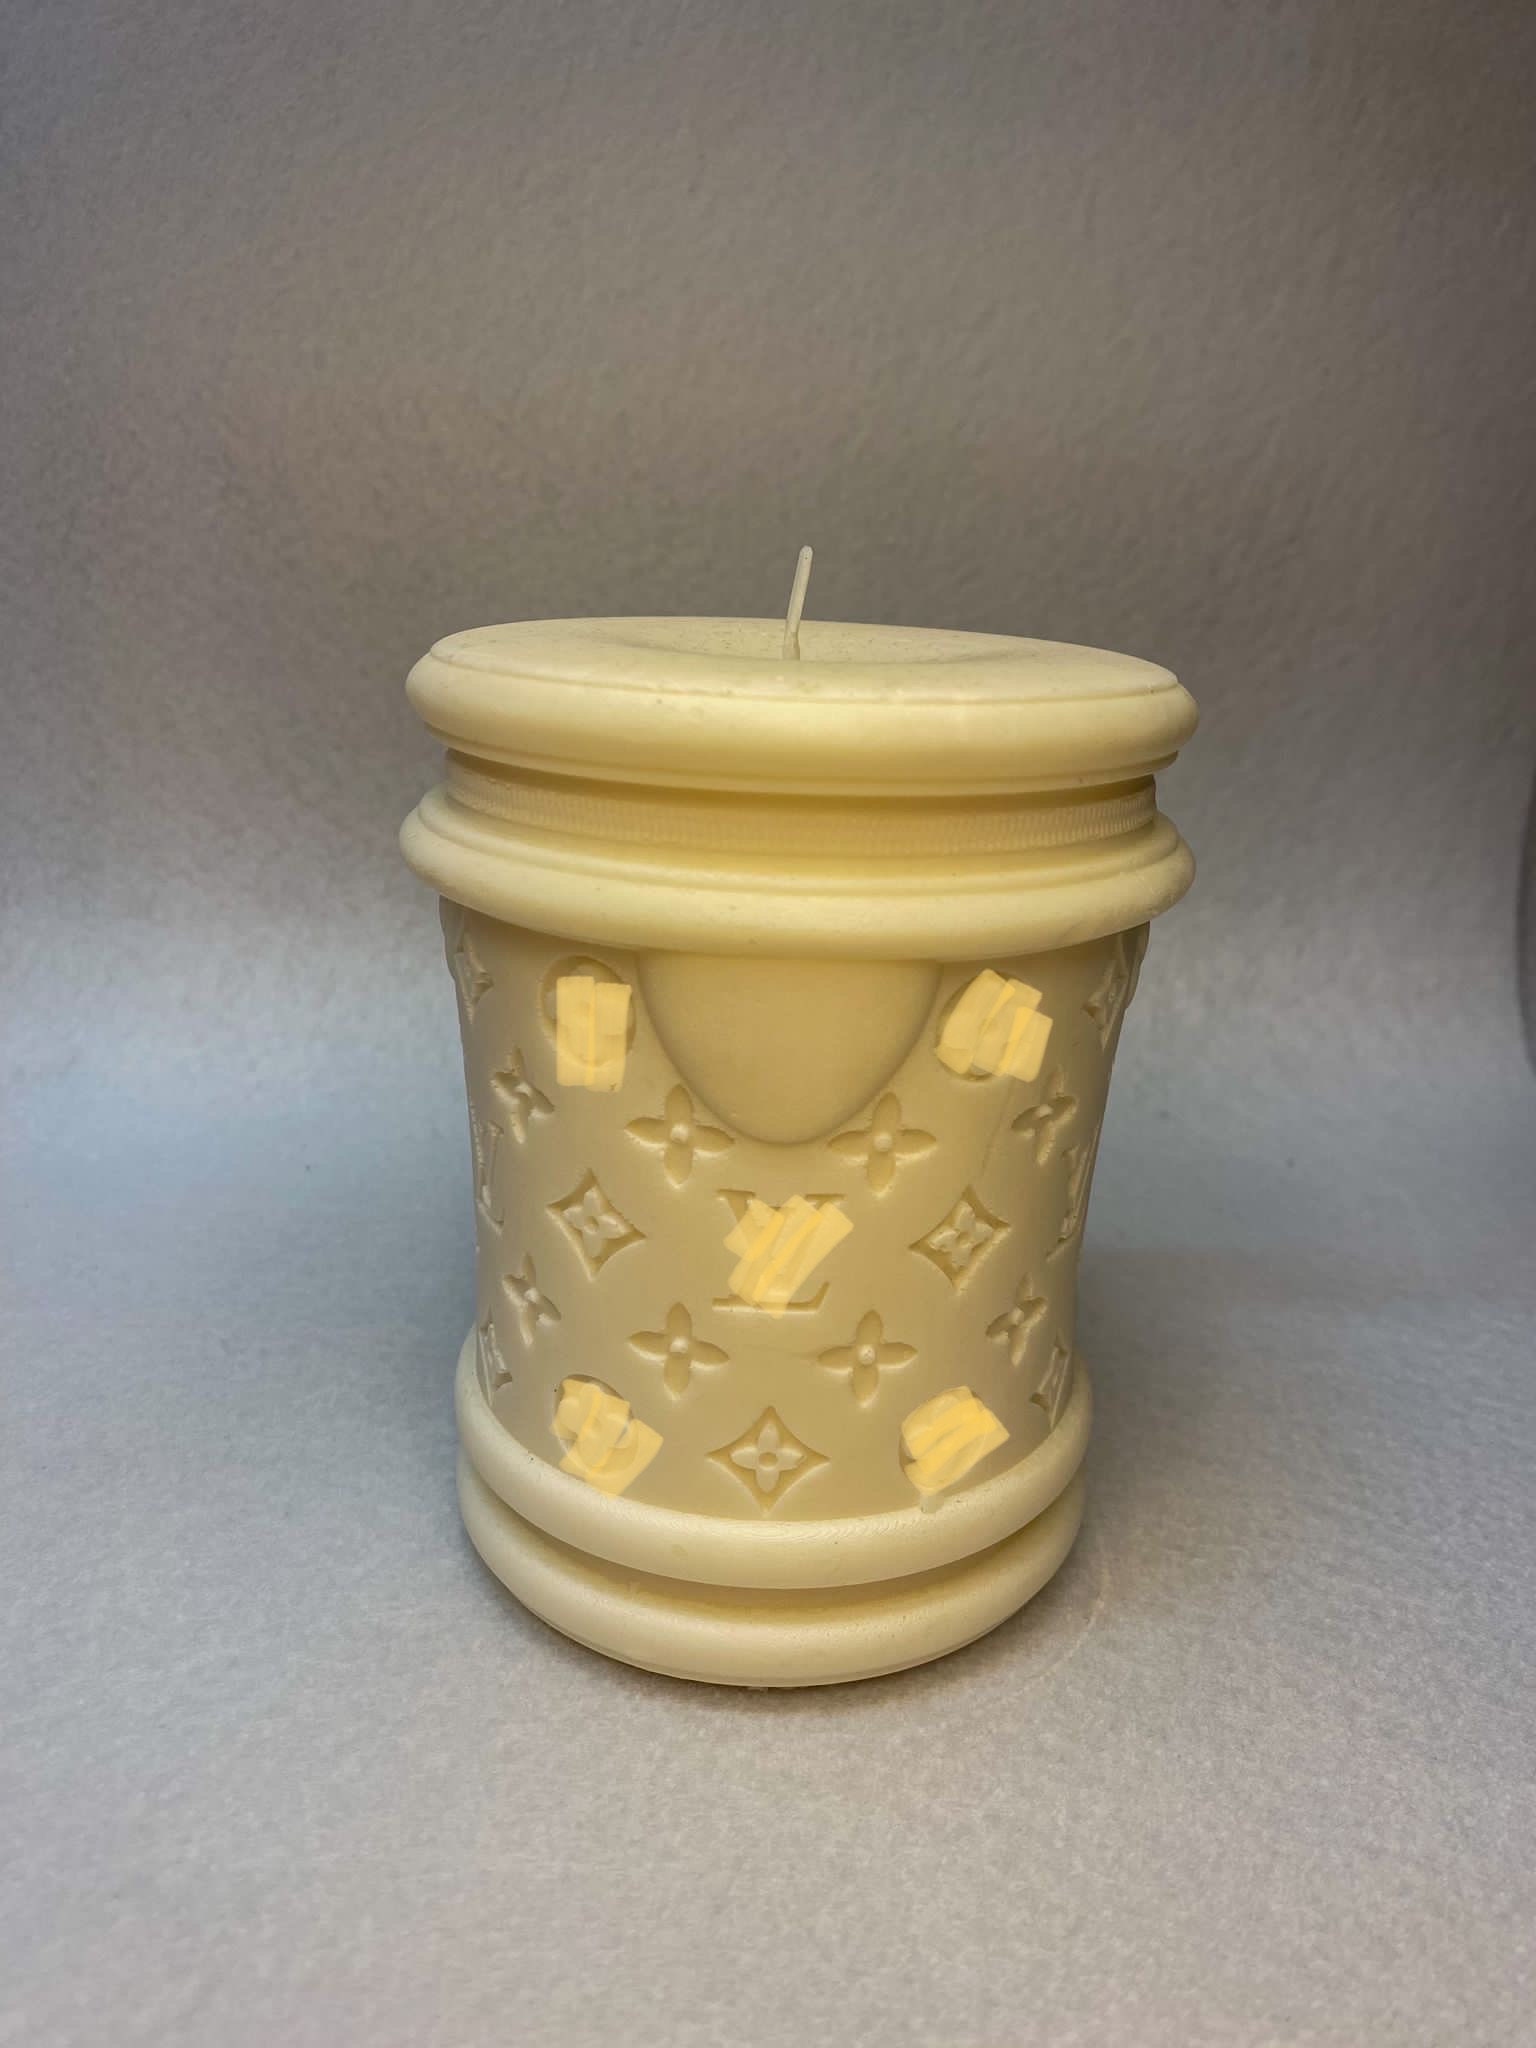 Luxurious Jar Shape Scented Decorative Candle 100% Handcrafted 